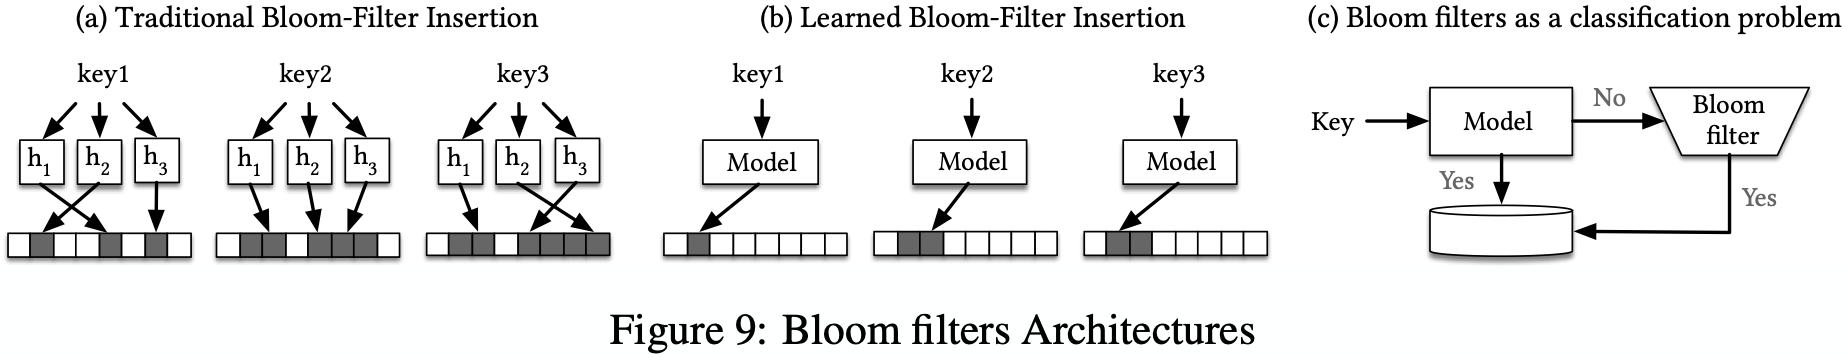 9-bloom-filter-architectures